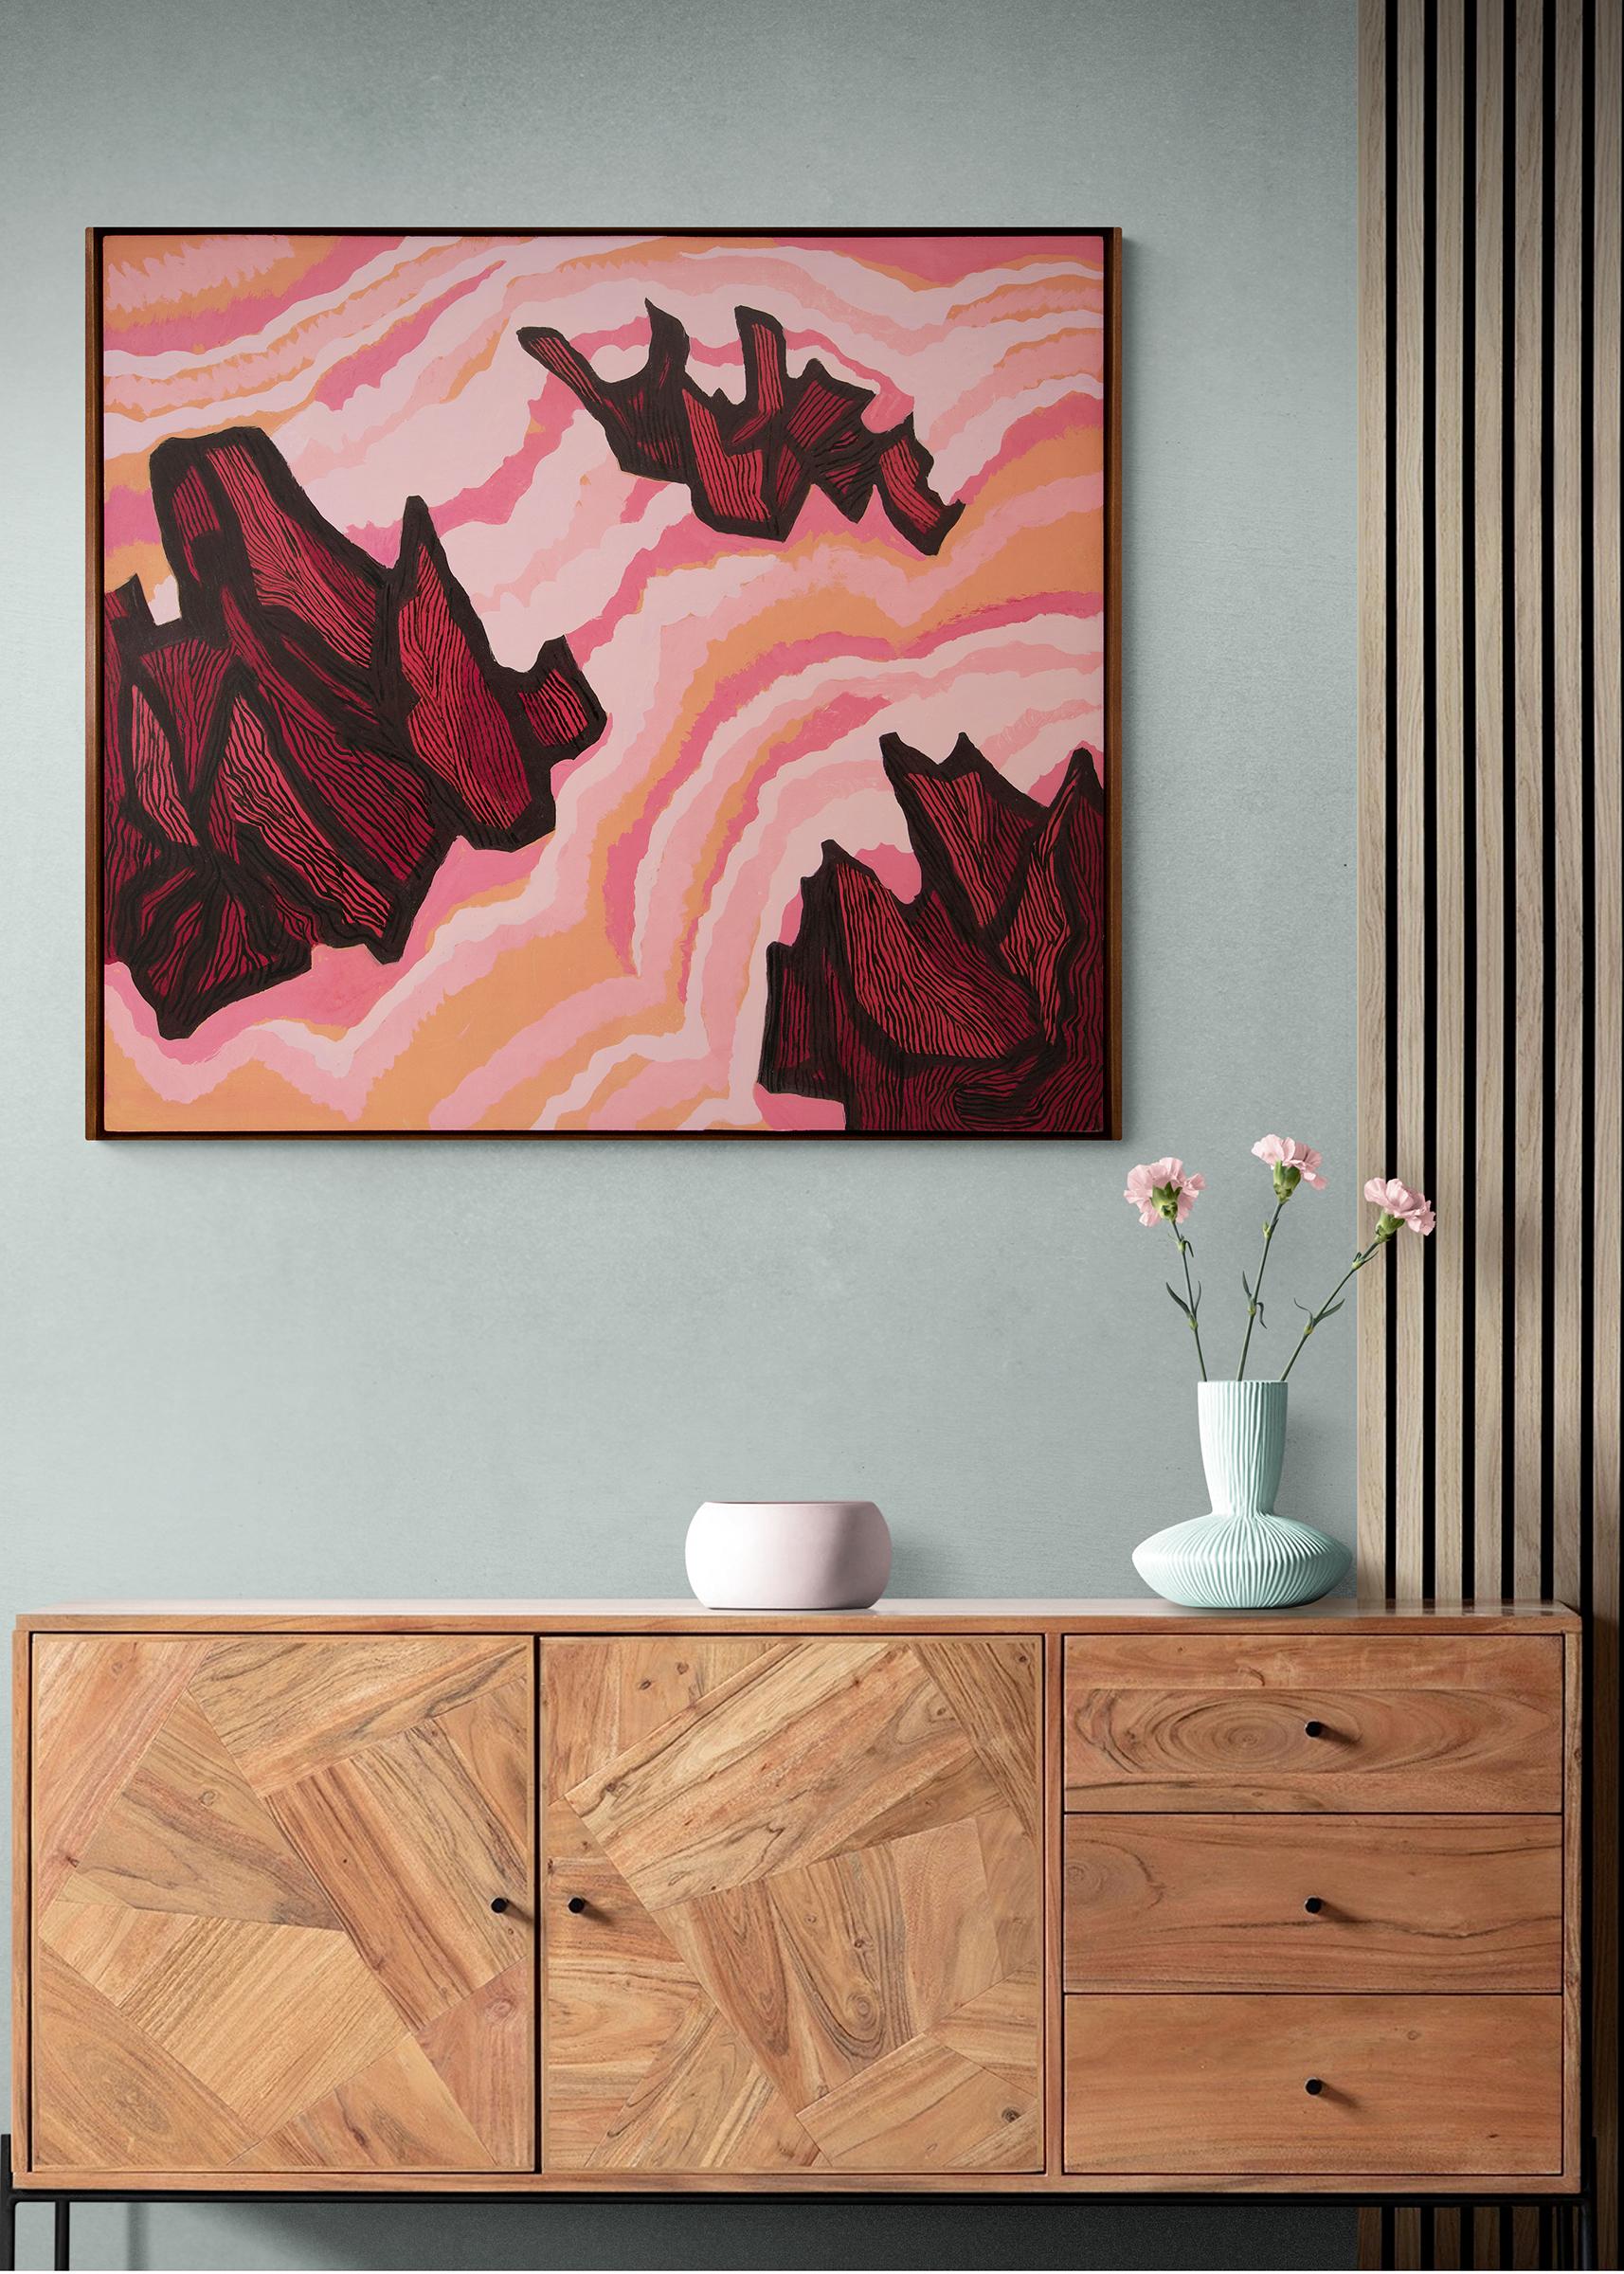 Jagged Sea, 1960s Abstract Landscape Painting, Tones of Pink, Red, Orange  For Sale 3